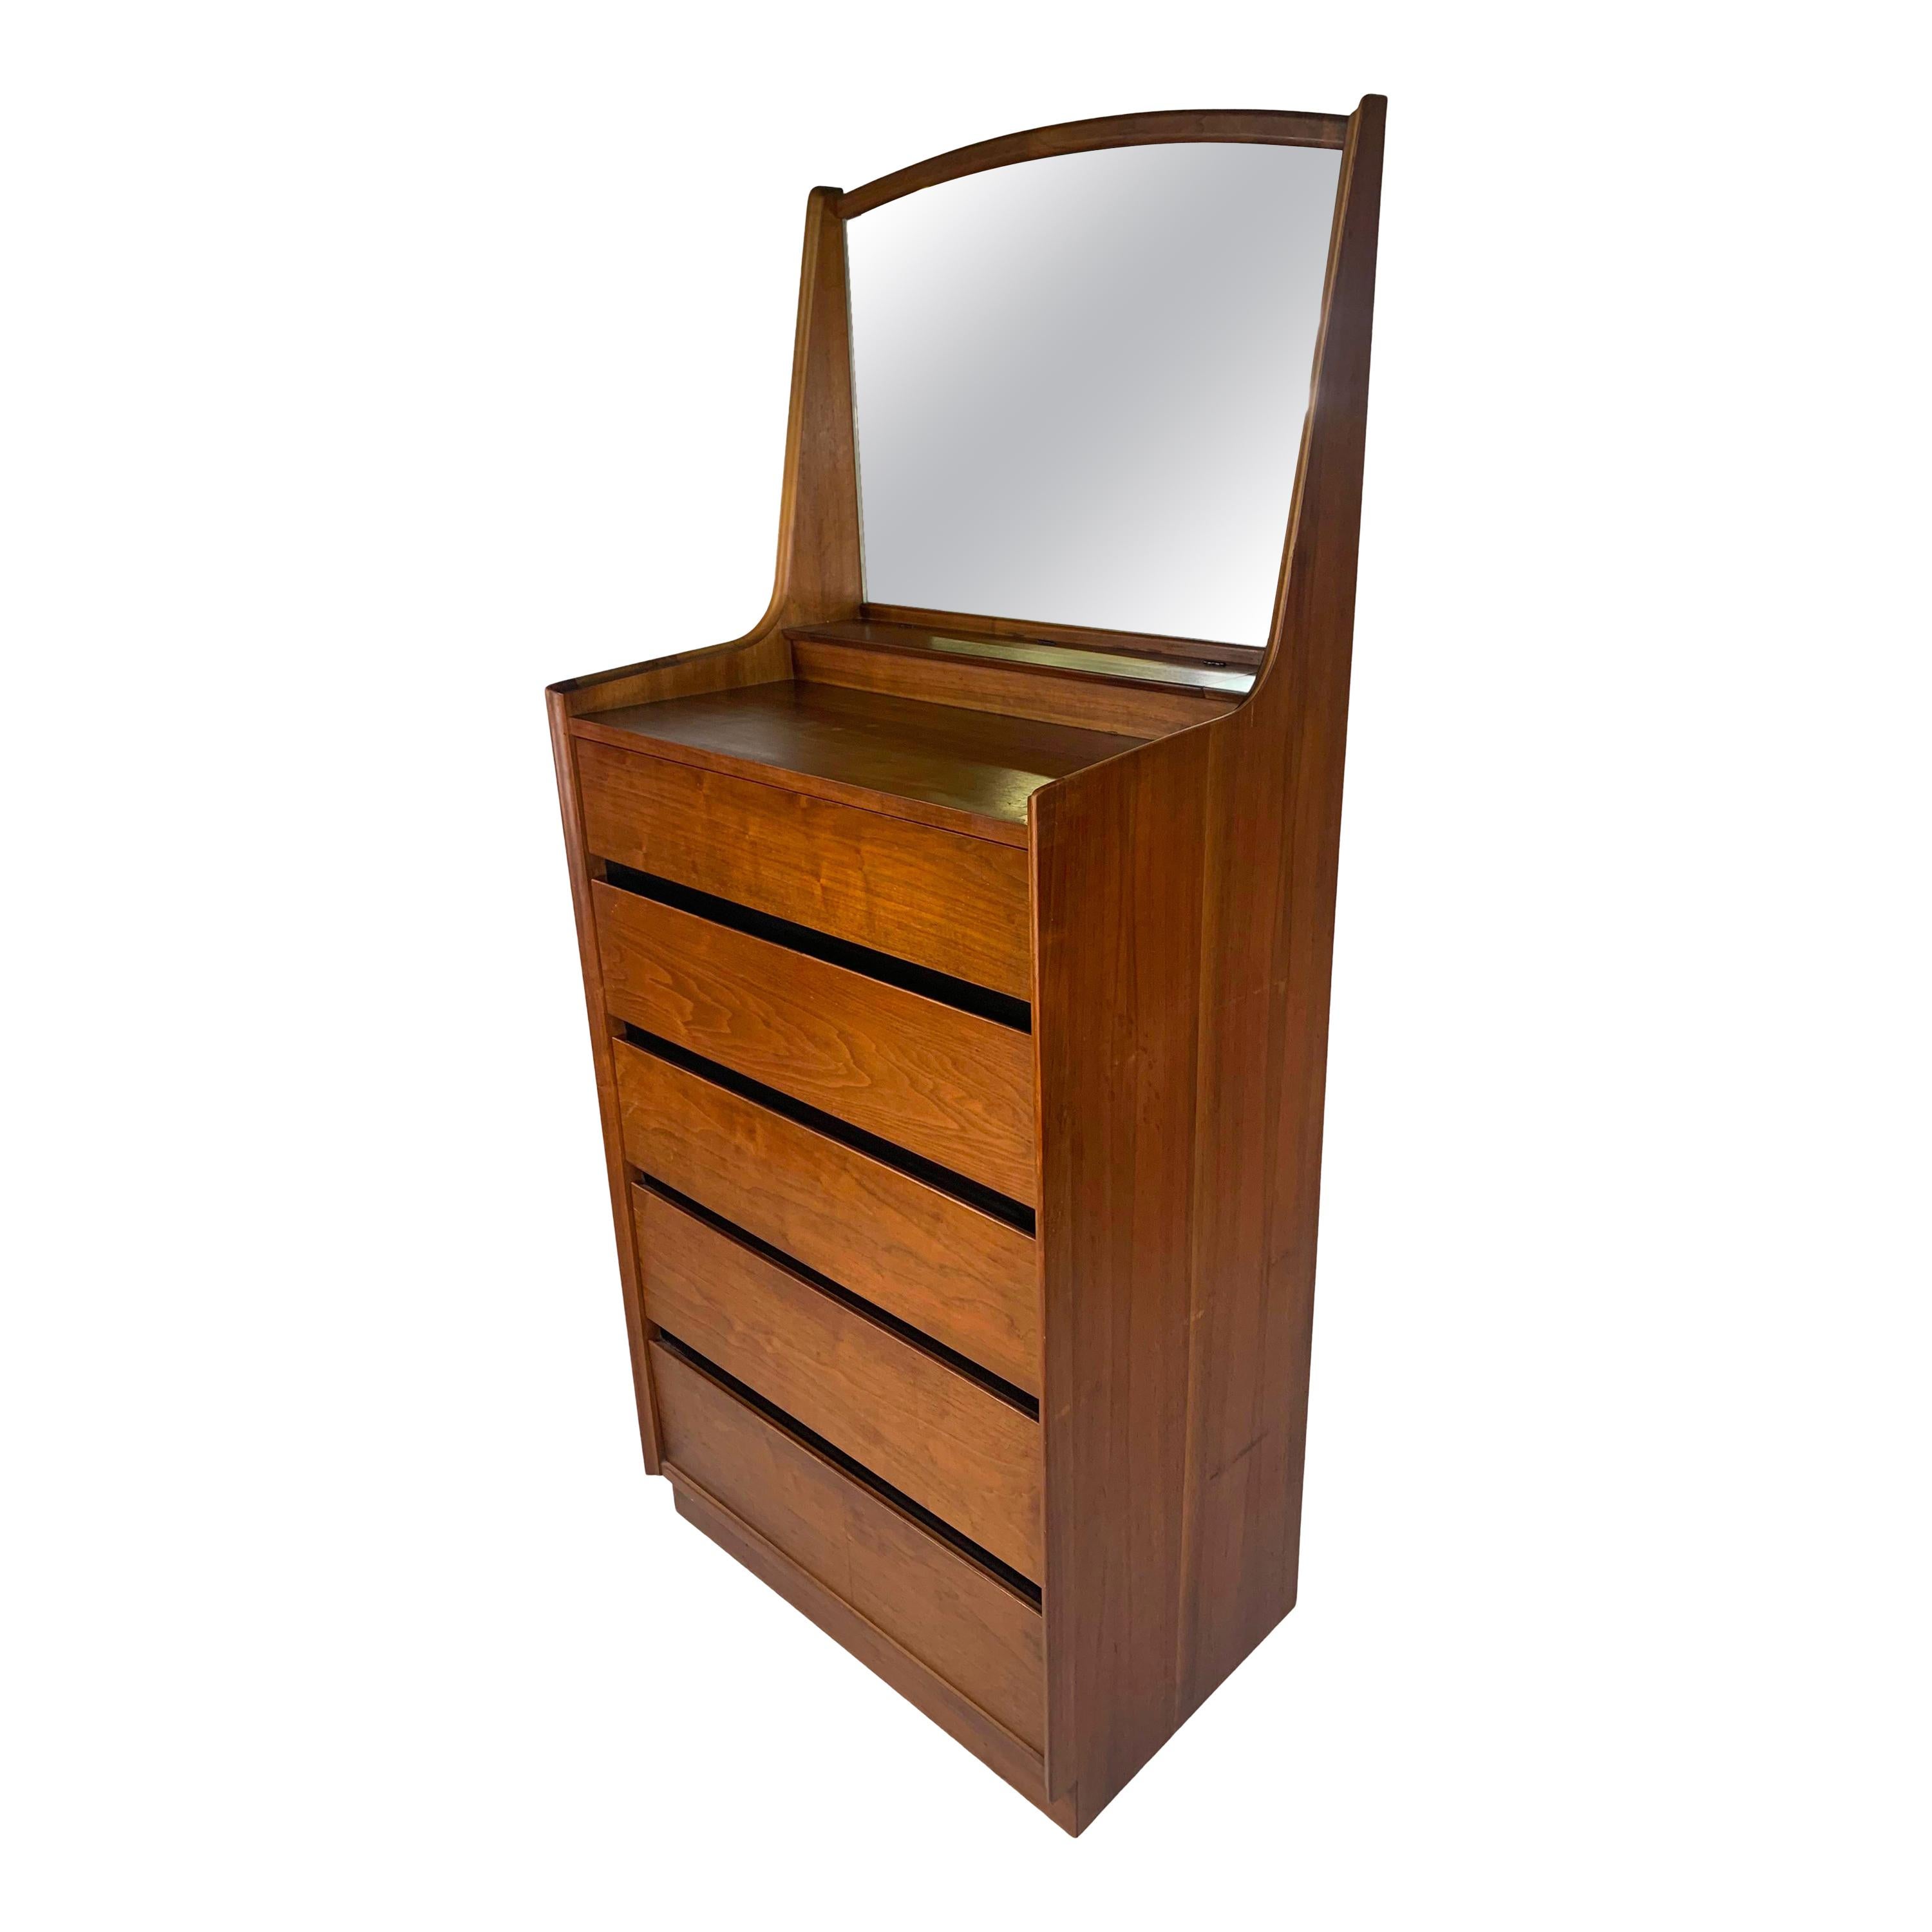 Dillingham Esprit Walnut Tall Chest with Attached Mirror